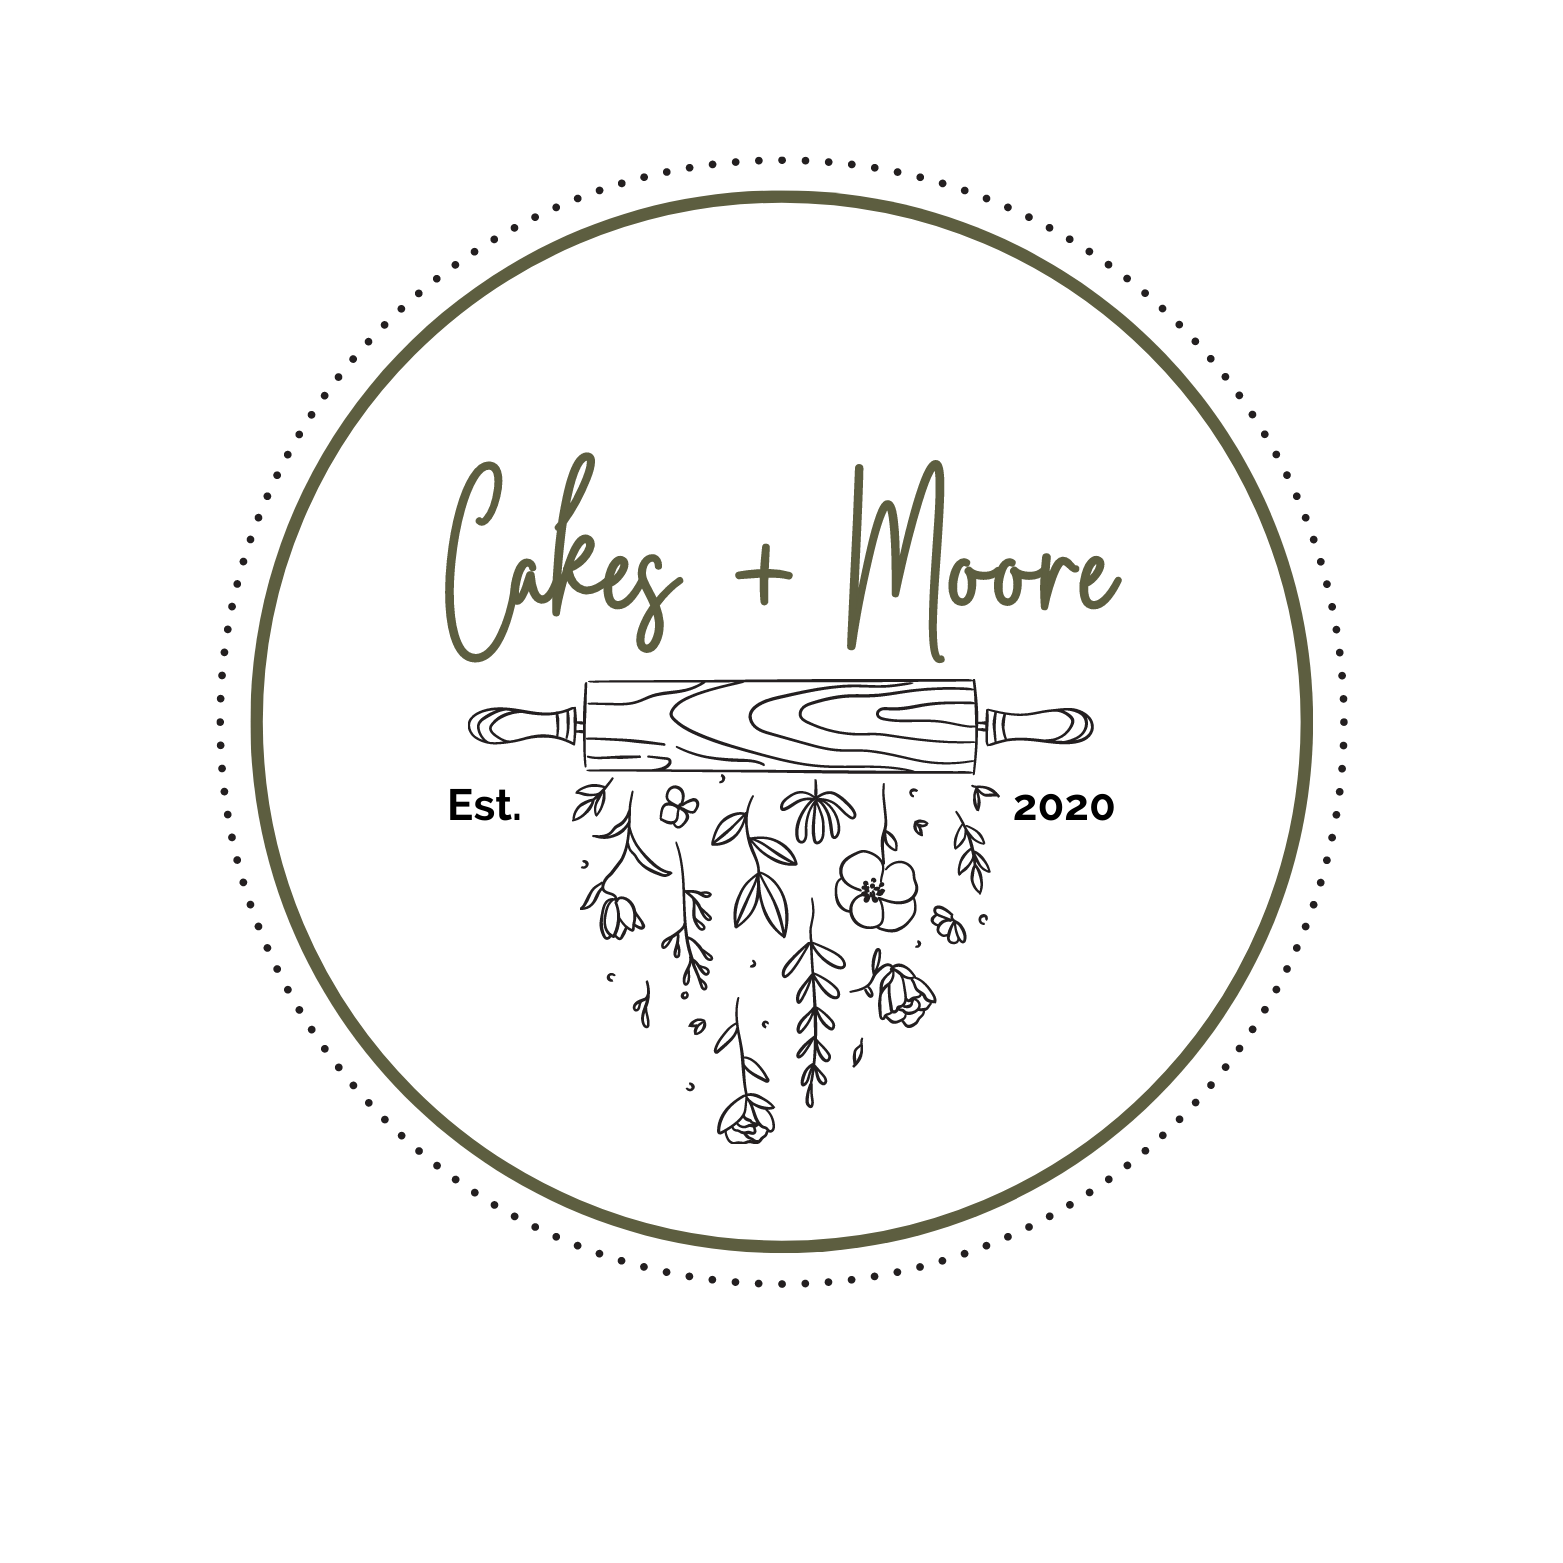 Cakes+Moore Page Loading Logo